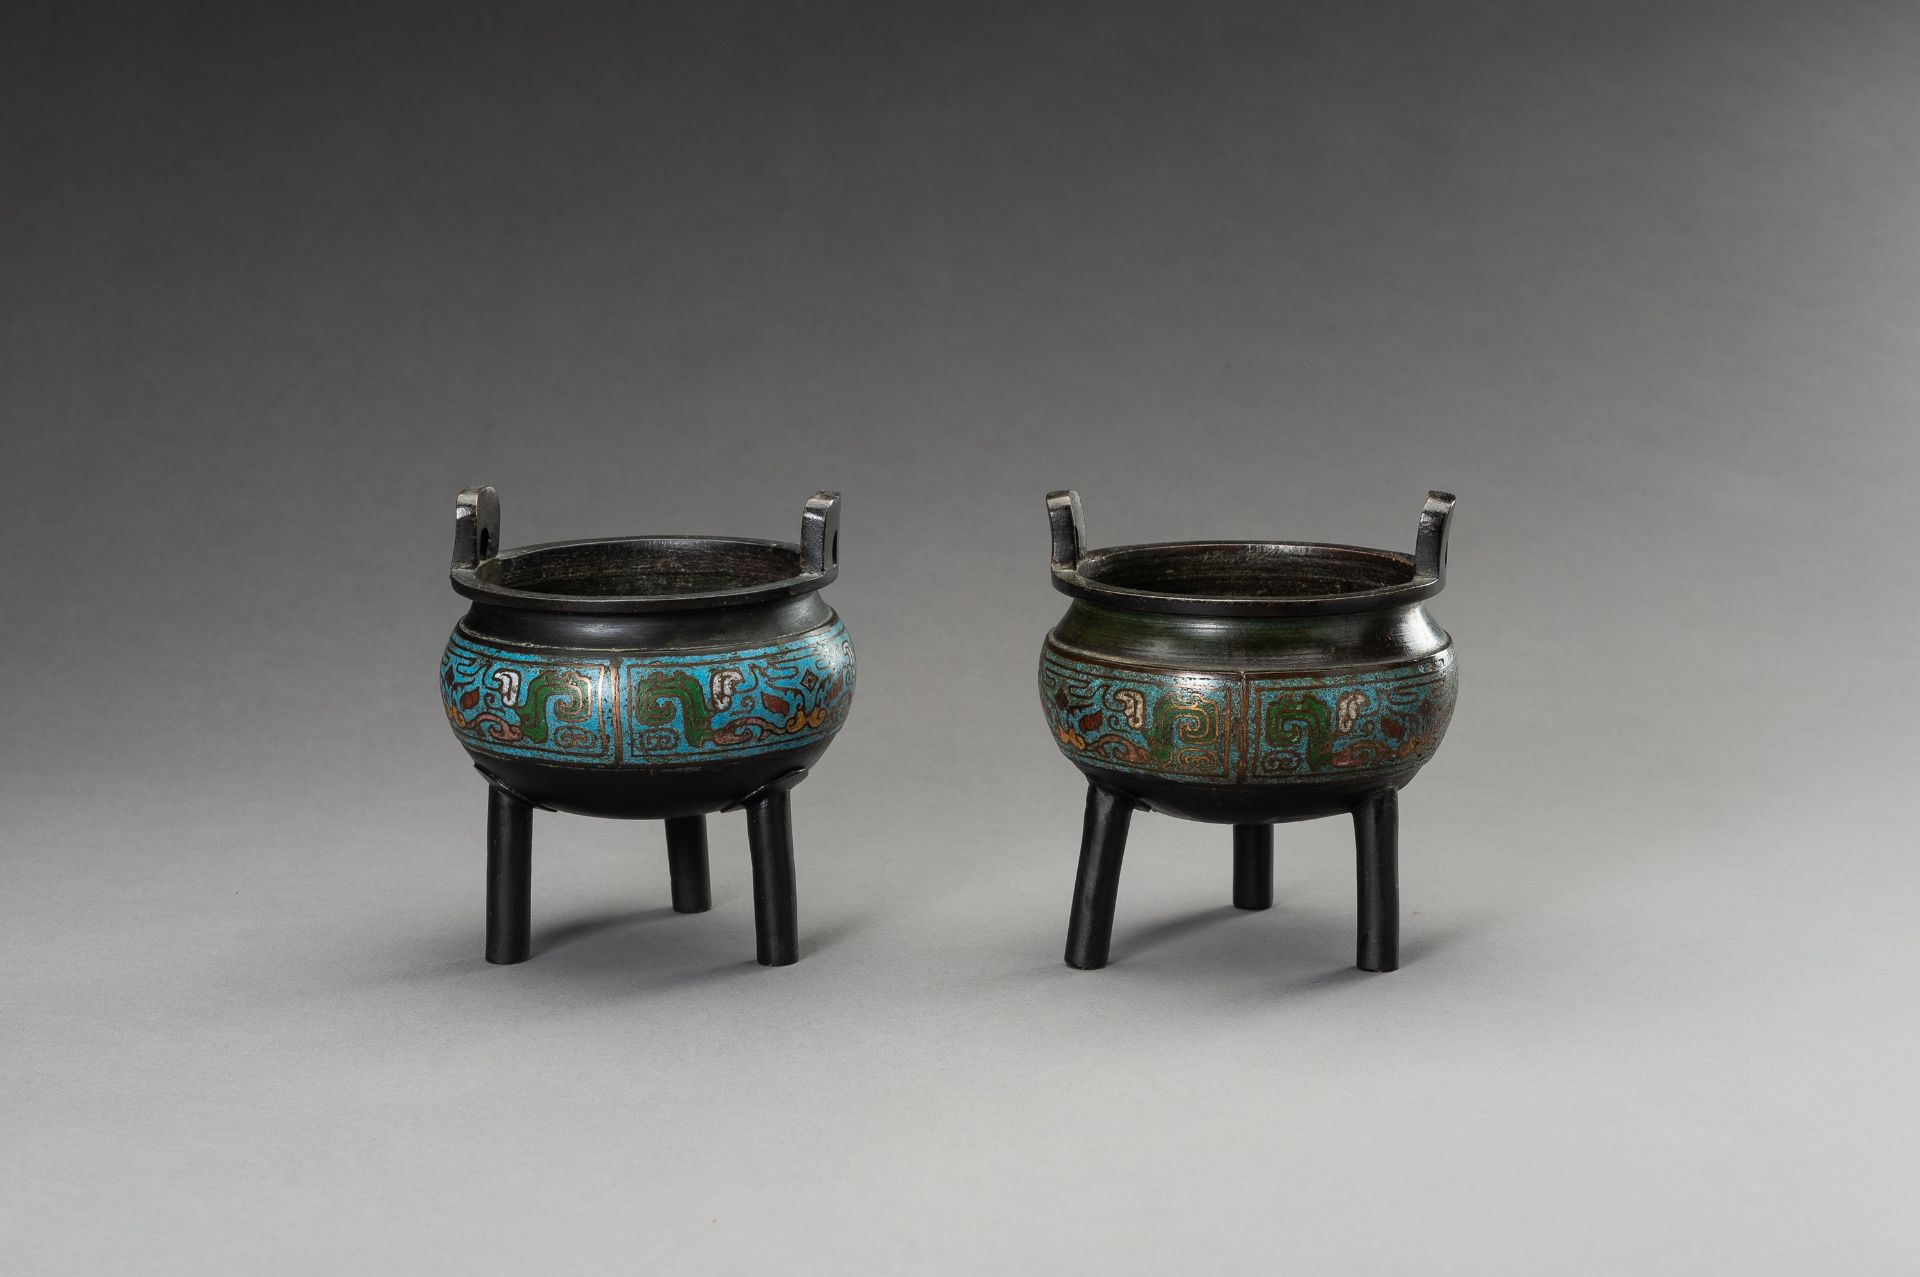 A PAIR OF CHAMPLEVE ENAMEL BRONZE TRIPOD CENSERS, QING DYNASTY - Image 4 of 9